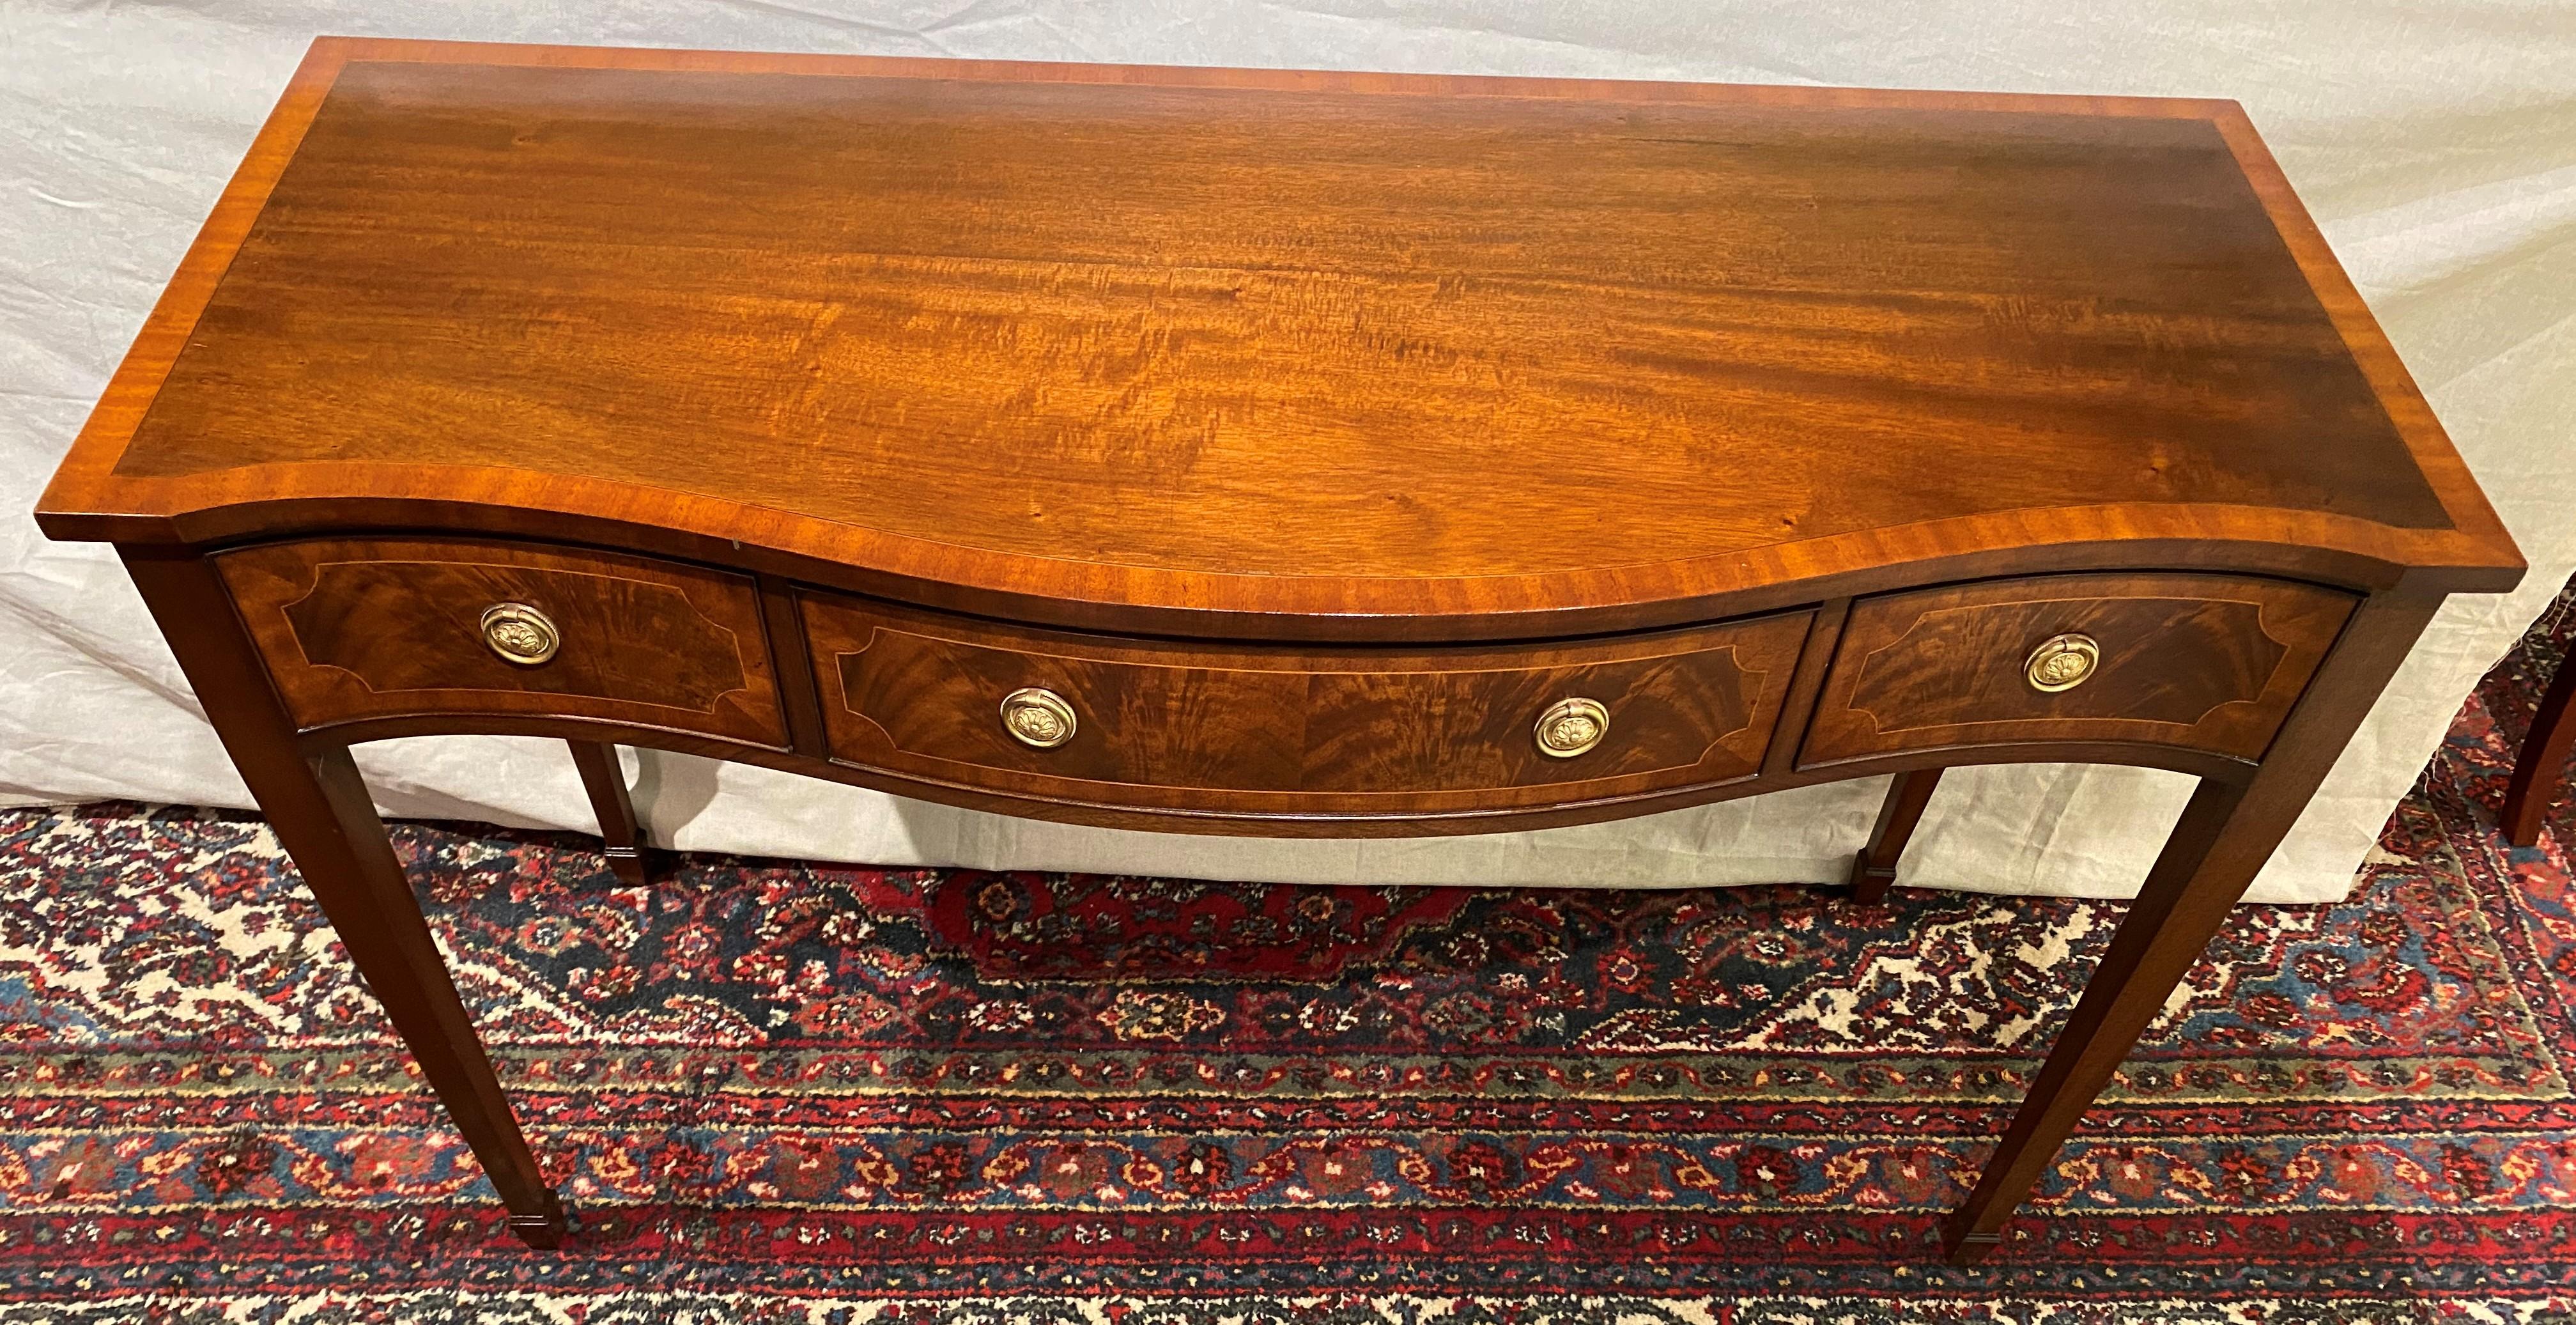 A fine English mahogany console table by Frederick Tibbenham of Ipswich, England, with crossbanded conforming top surmounting three fitted dovetailed cockbeaded frieze drawers with crotched mahogany veneer, satinwood banding and punched floral ring